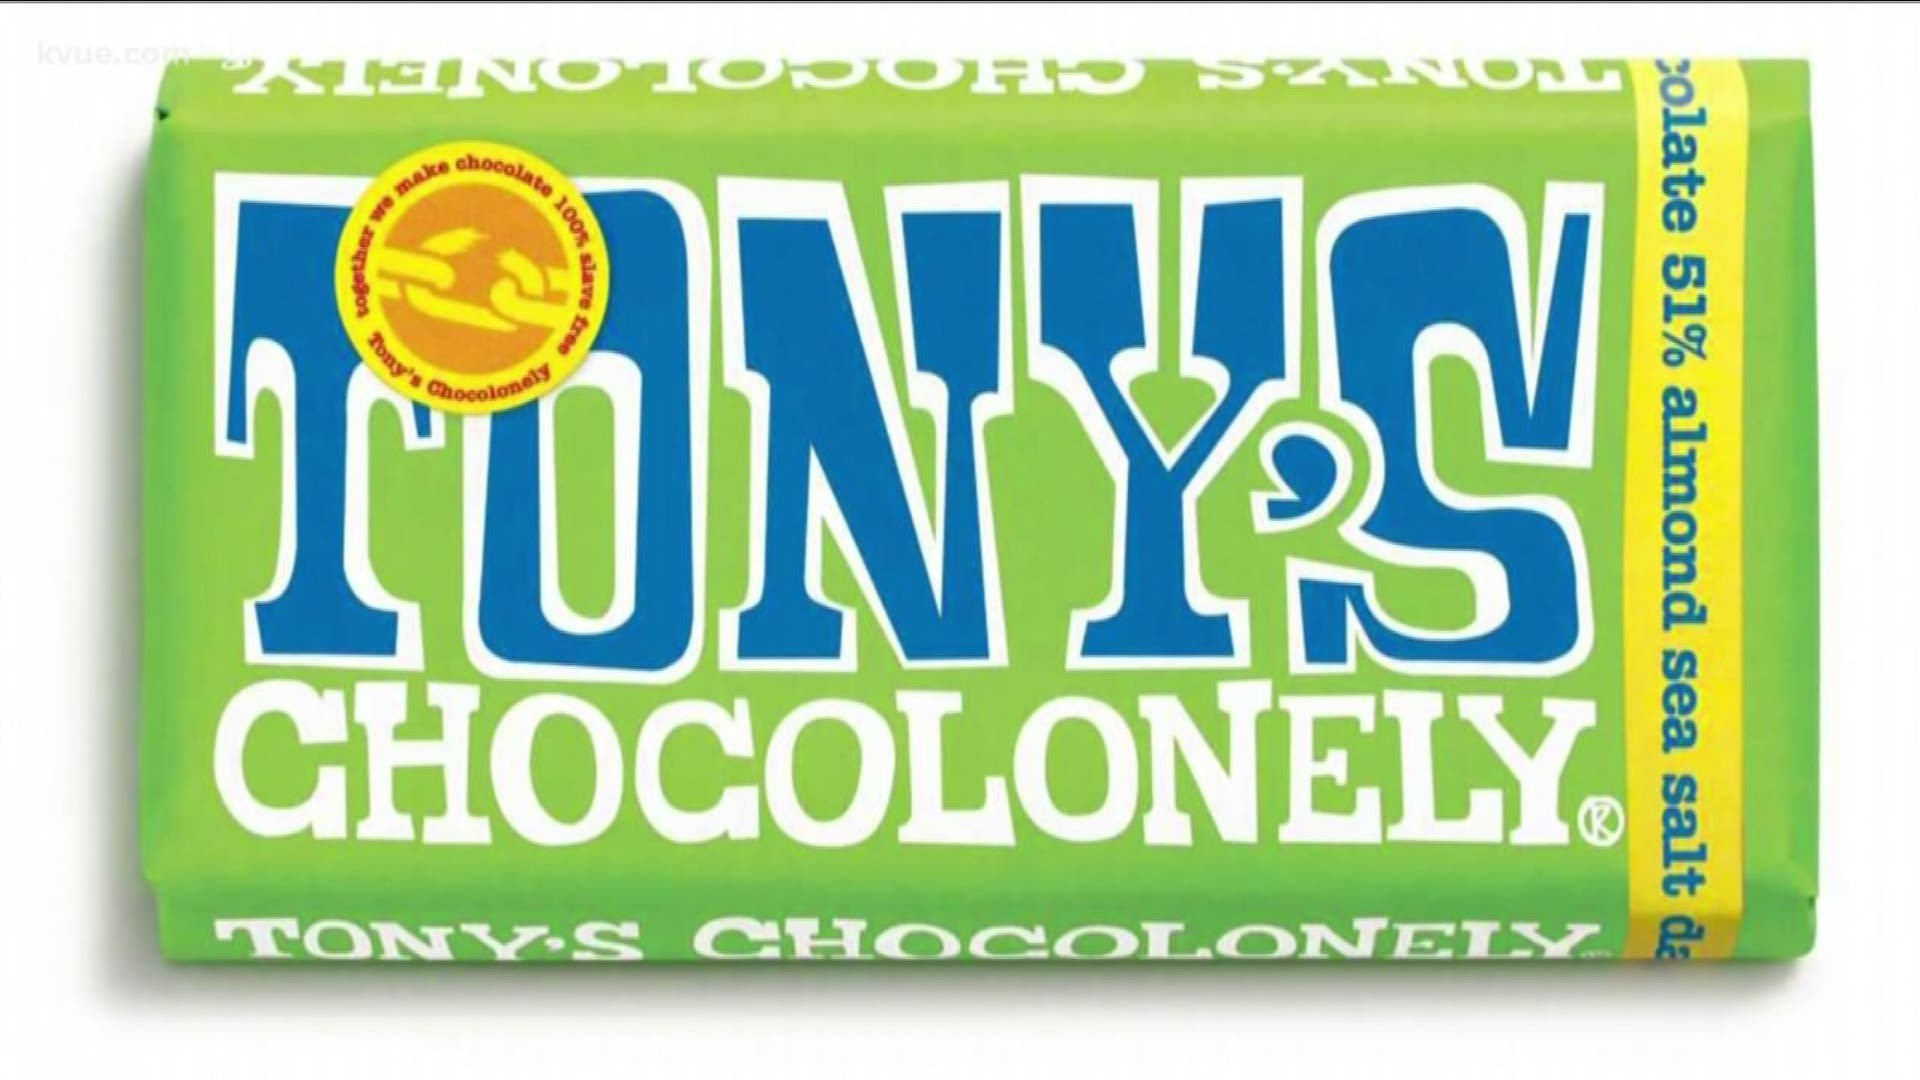 A company named Tony's Chocolonely is using SXSW to spread their message about ethics in the food industry. Members of the company are driving from city to city to meet new friends, share chocolate and information about the inequalities in the cocoa industry.